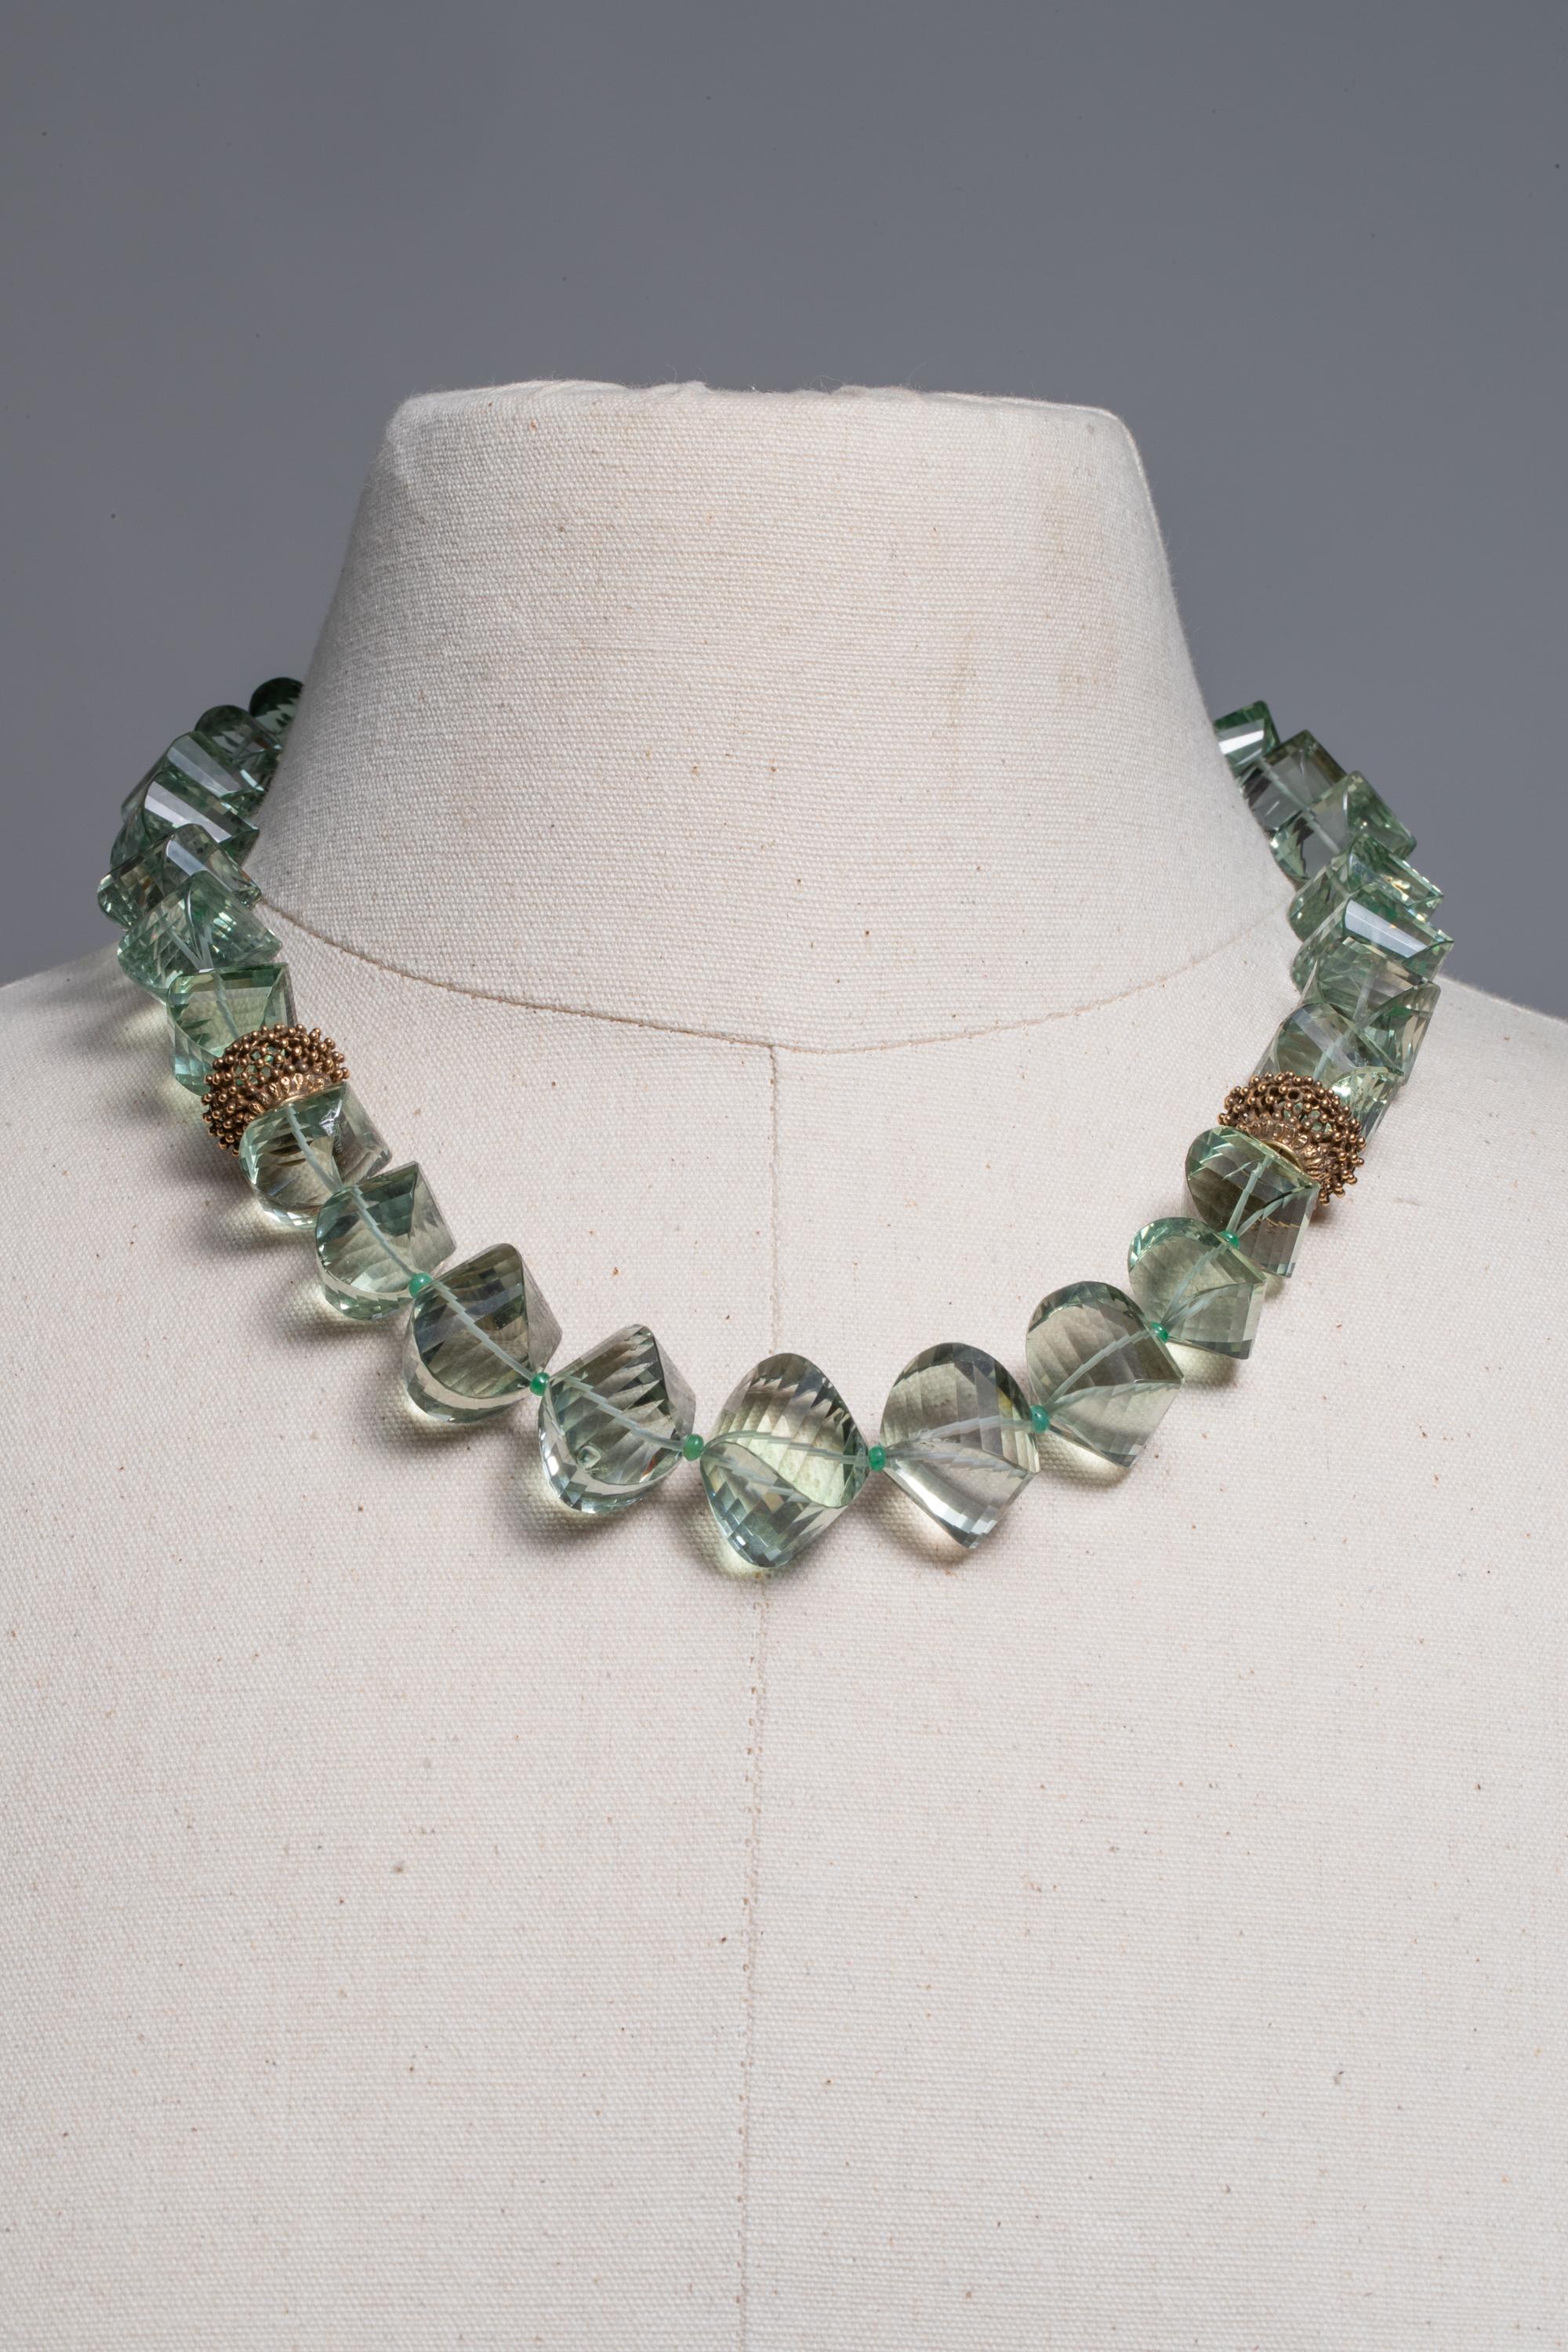 Beautifully rippled, cushion-cut faceted green amethyst (prasiolite) with textured 18K gold beads at the collar bone.  Slightly graduated beaded necklace with emeralds in between with 18K gold clasp and a bit of extra chain for adjust-ability.  It